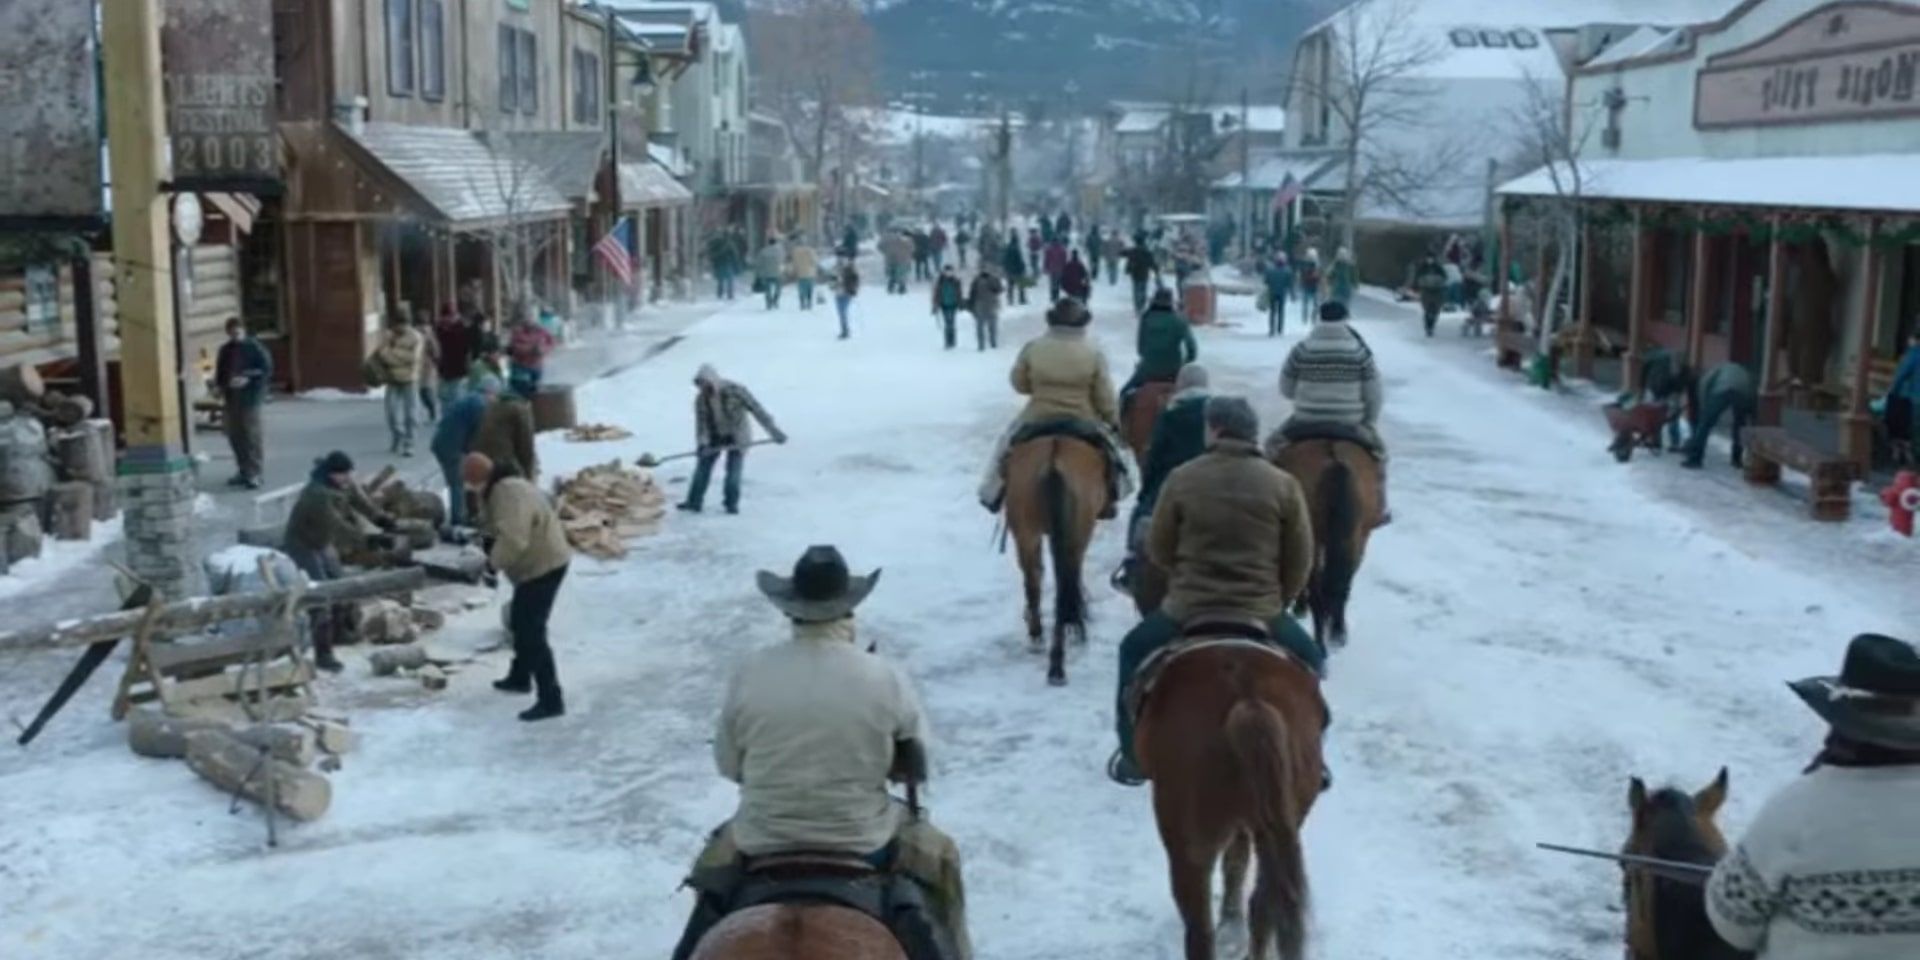 A shot of Joel and Ellie on horseback entering the snow-filled town square of Jackson, Wyoming to meet Tommy.